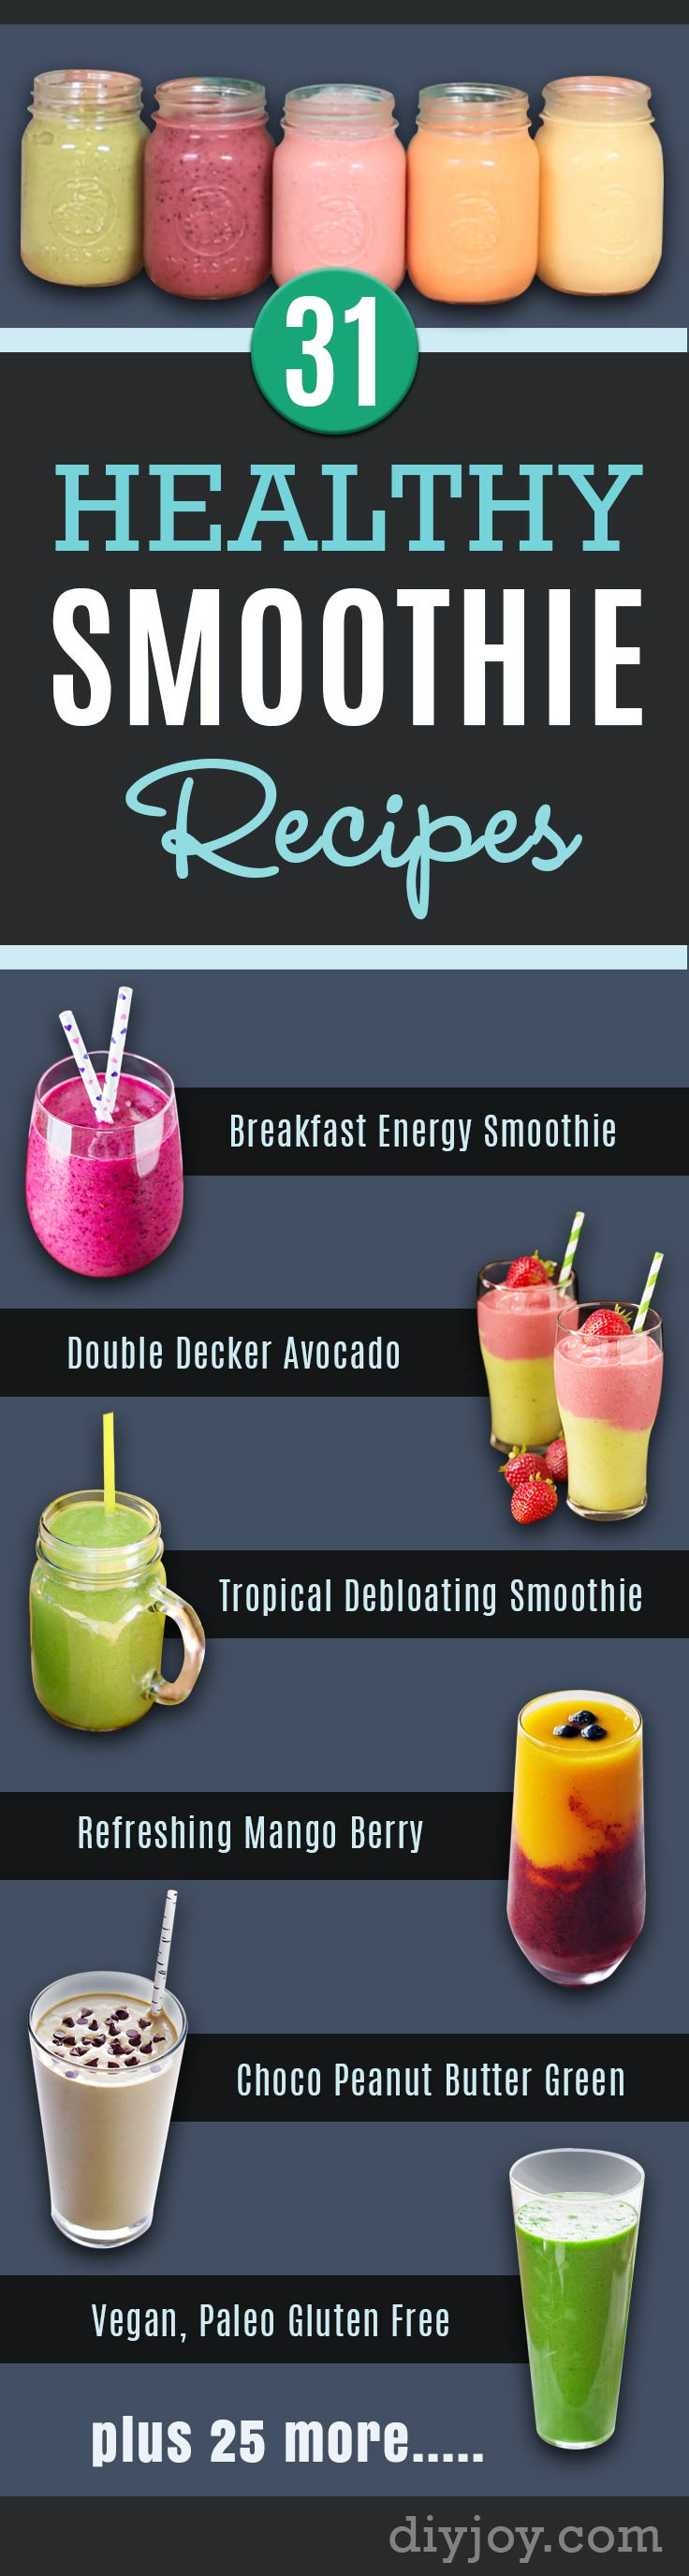 Smoothies Recipes Healthy
 31 Healthy Smoothie Recipes